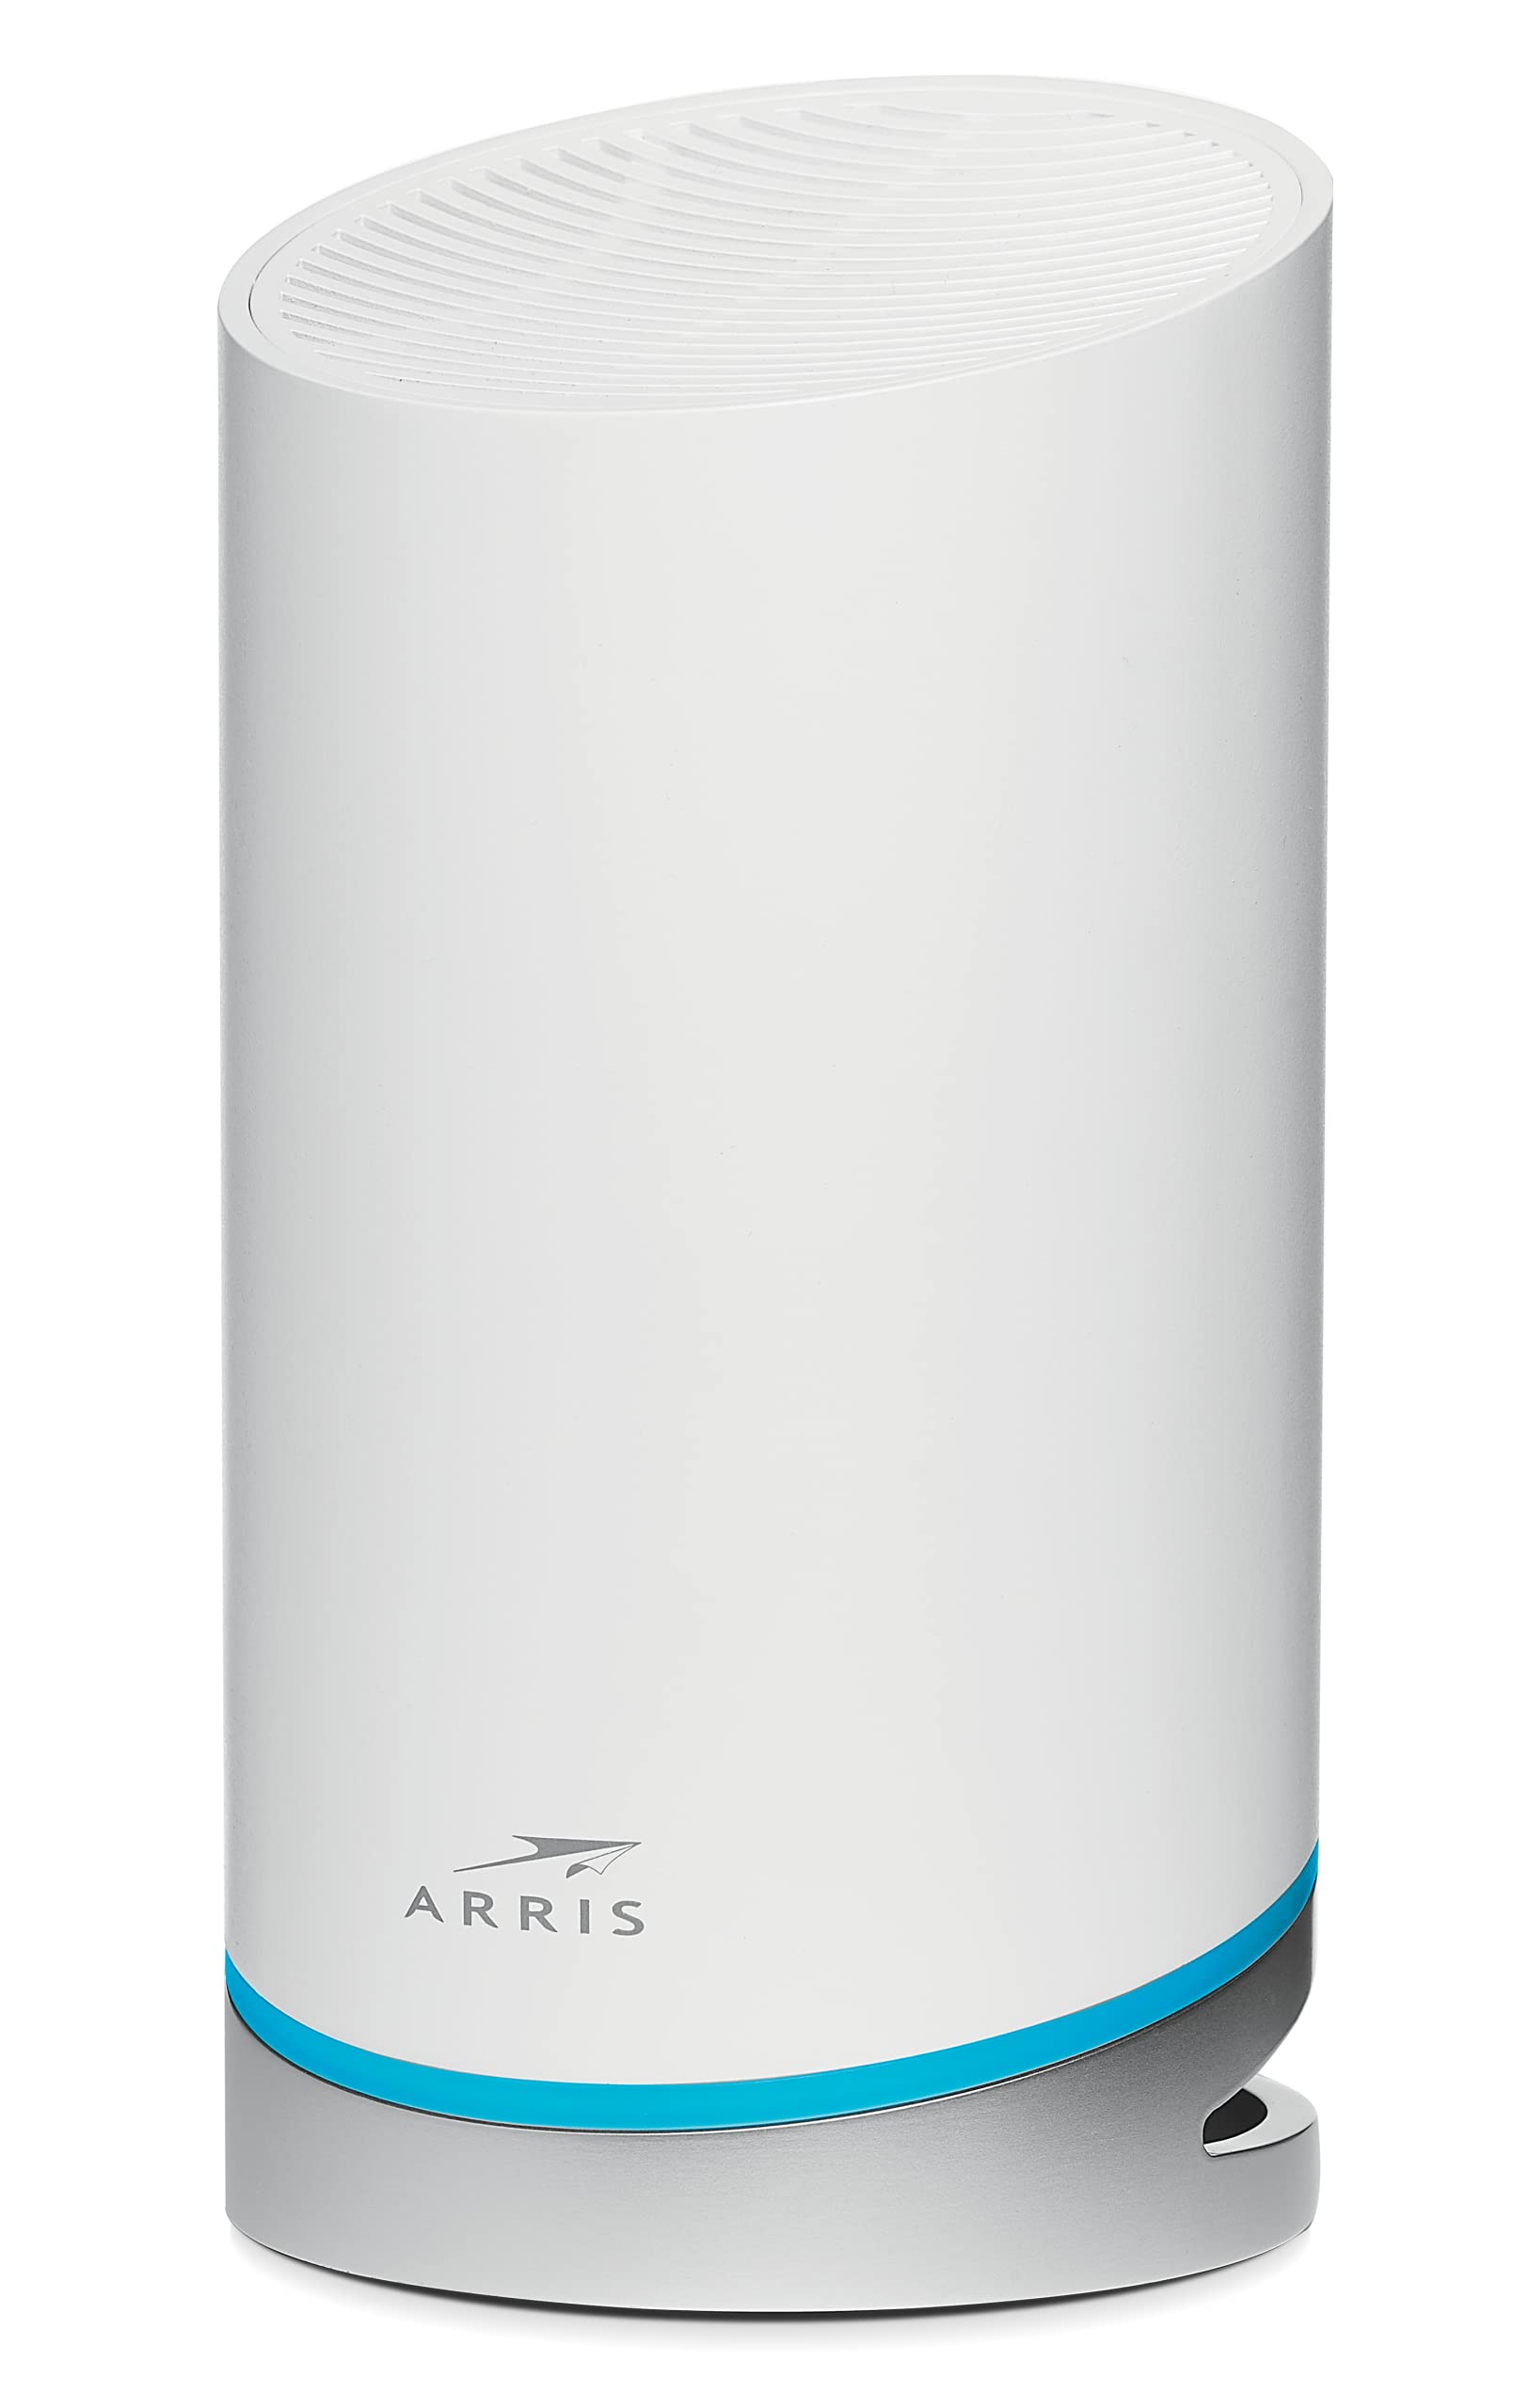 ARRIS Surfboard mAX W21 Tri-Band Mesh Ready Wi-Fi 6 Router | AX6600 Wi-Fi Speeds up to 6.6 Gbps | Coverage up to 2,750 sq ft | 1 Router | Two 1 Gbps Ports | Alexa Support | 2 Year Warranty